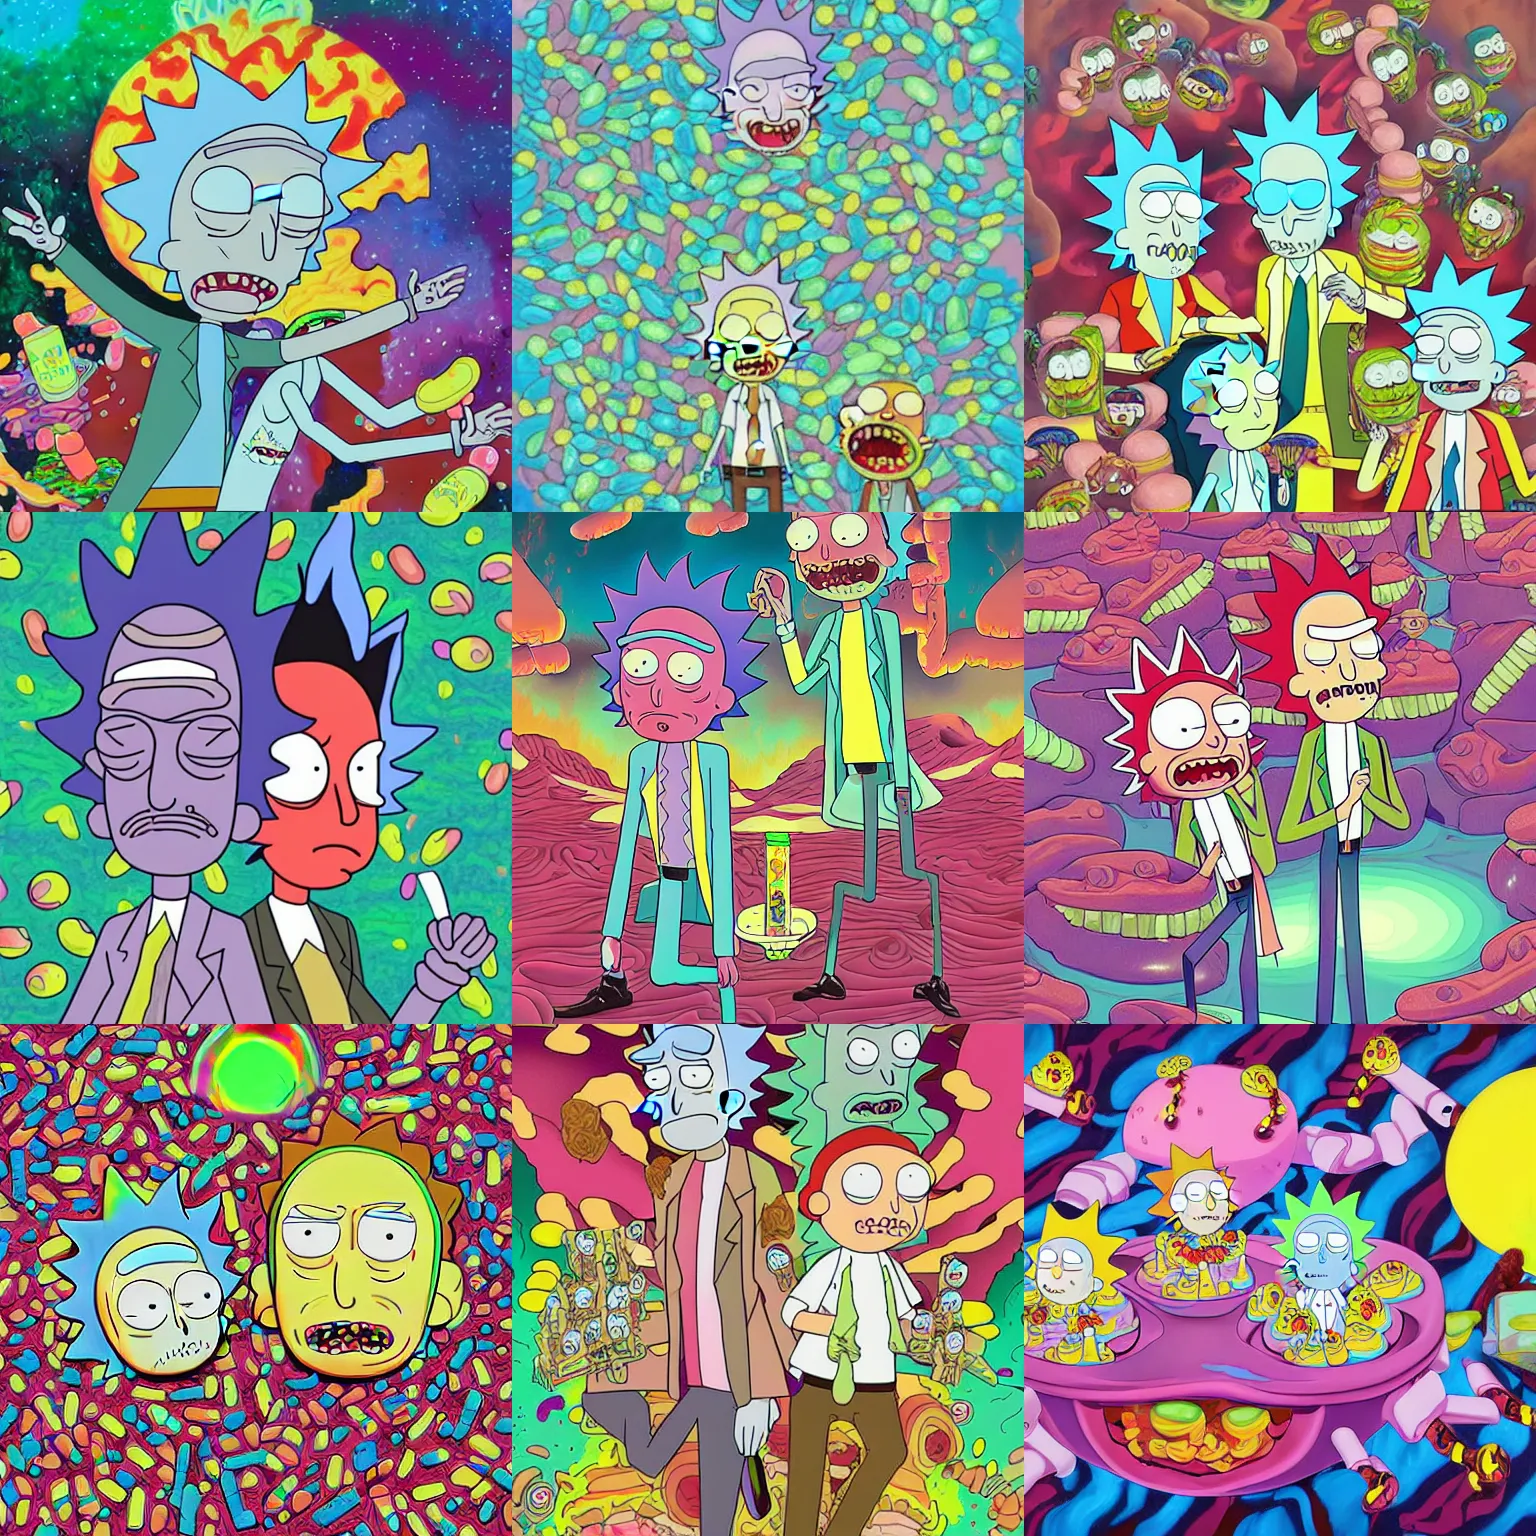 Prompt: digital painting of rick and morty made out of candy by james jean, hikari shimoda, mark ryden in the style of surrealism